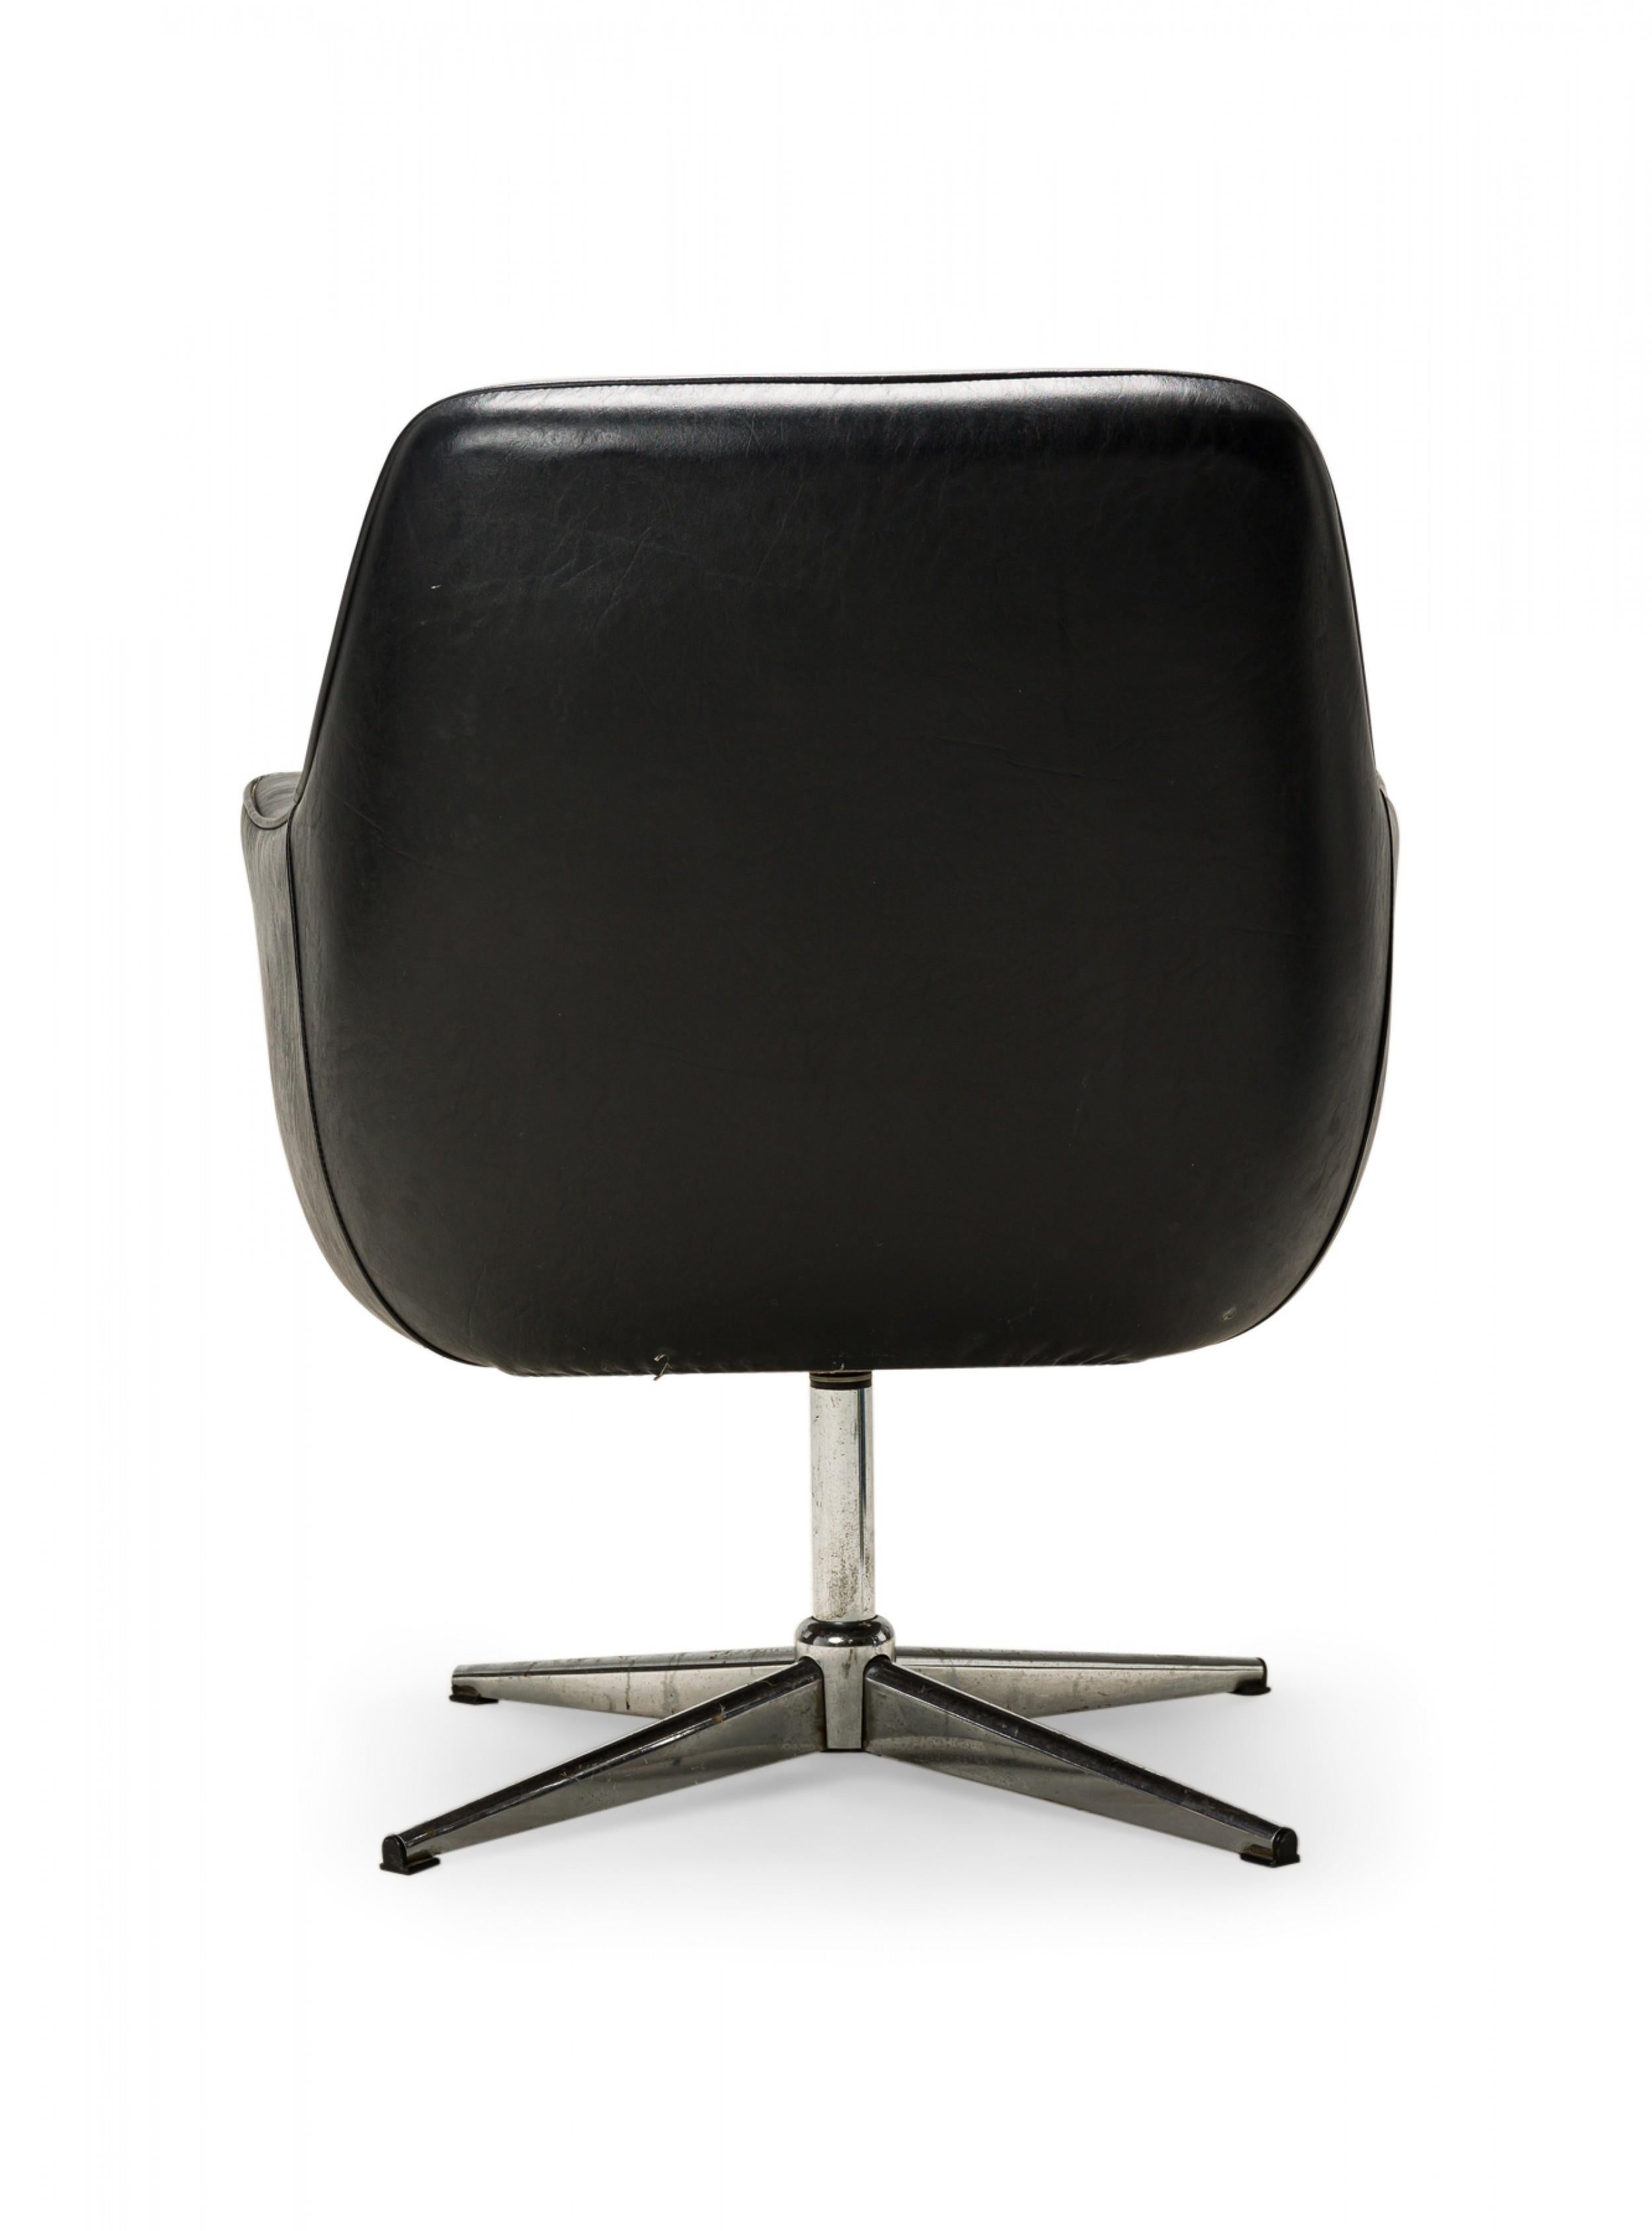 20th Century Overman Swedish Black Leather and Chrome Swivel Armchair For Sale